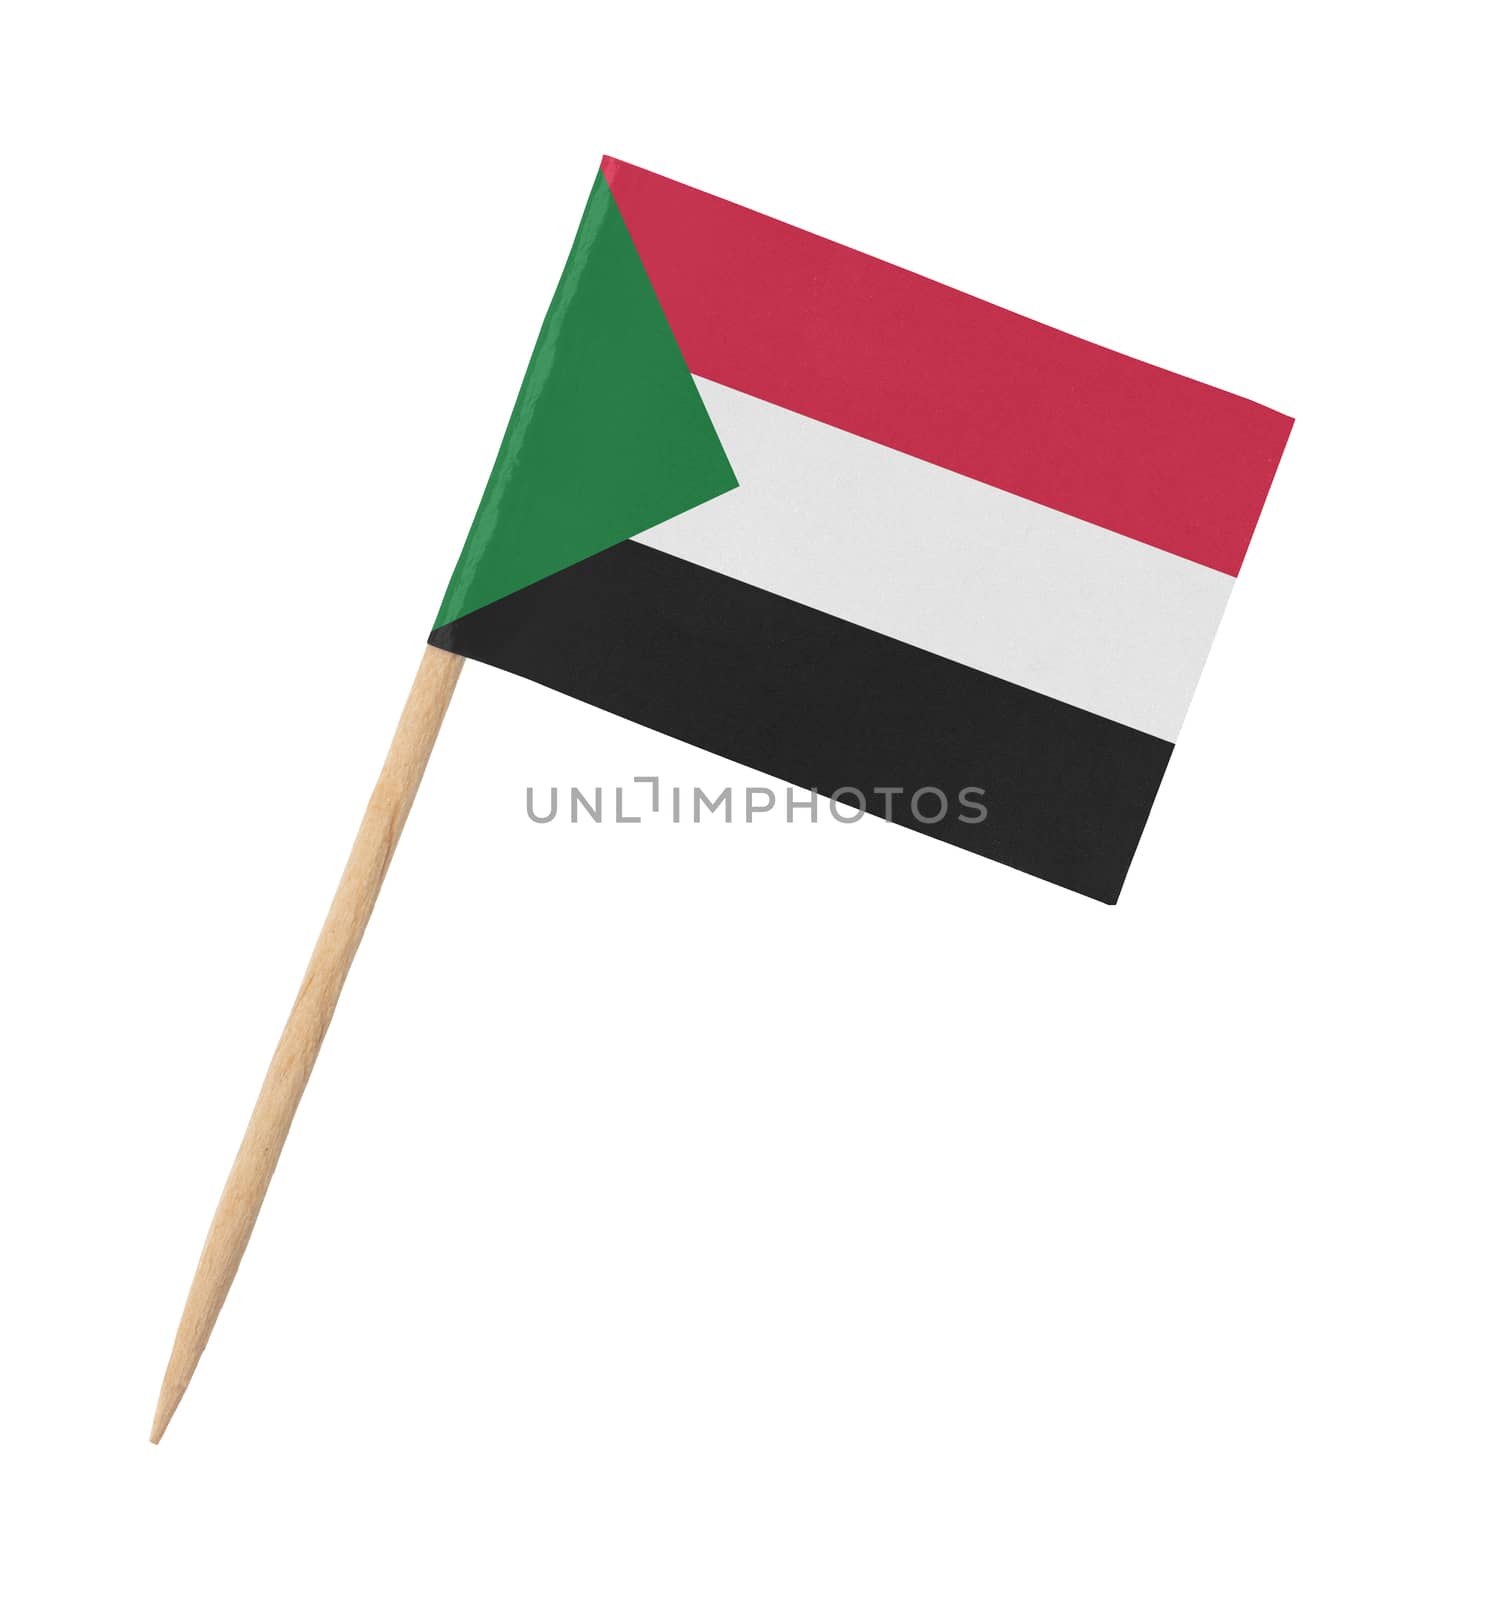 Small paper flag of Sudan on wooden stick, isolated on white